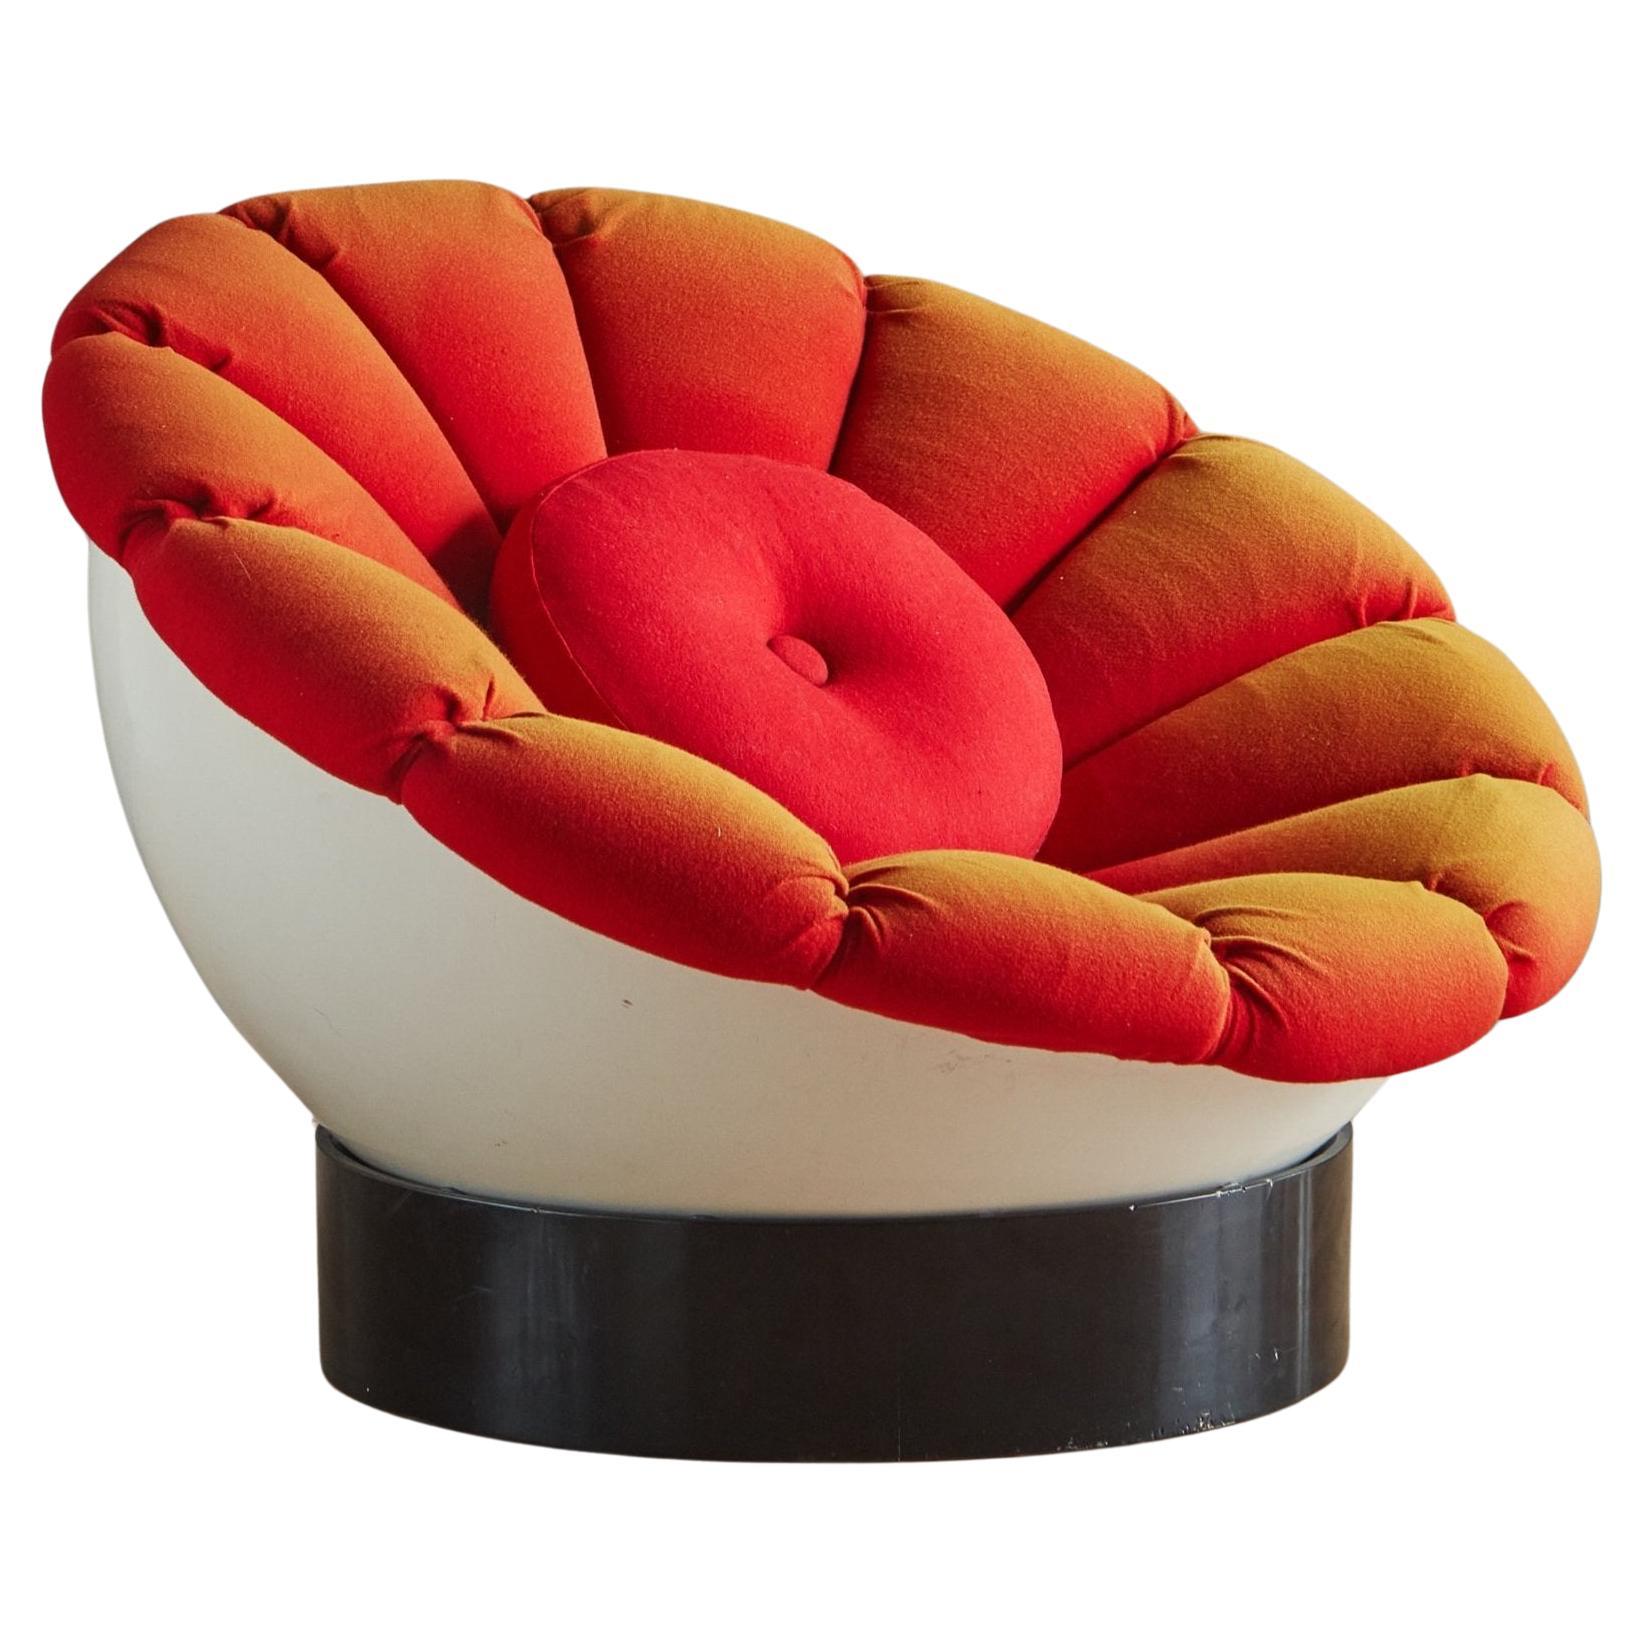 Fiberglass ‘Girasole’ Chair with Pillow by Luciano Frigerio, Italy 1960s